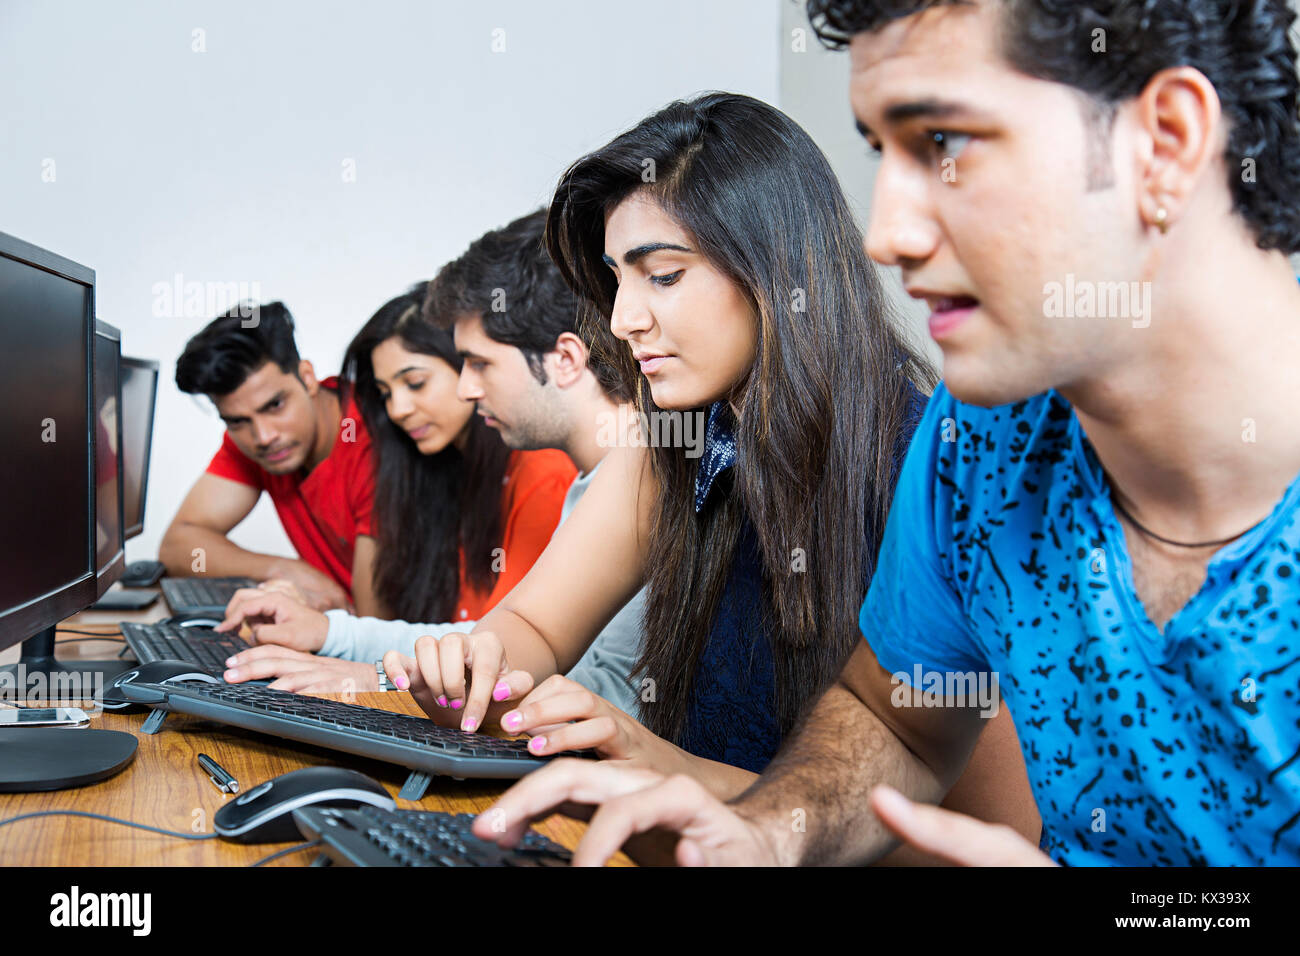 Indian College Student Boy Computer Study In Classroom Education Learning Stock Photo